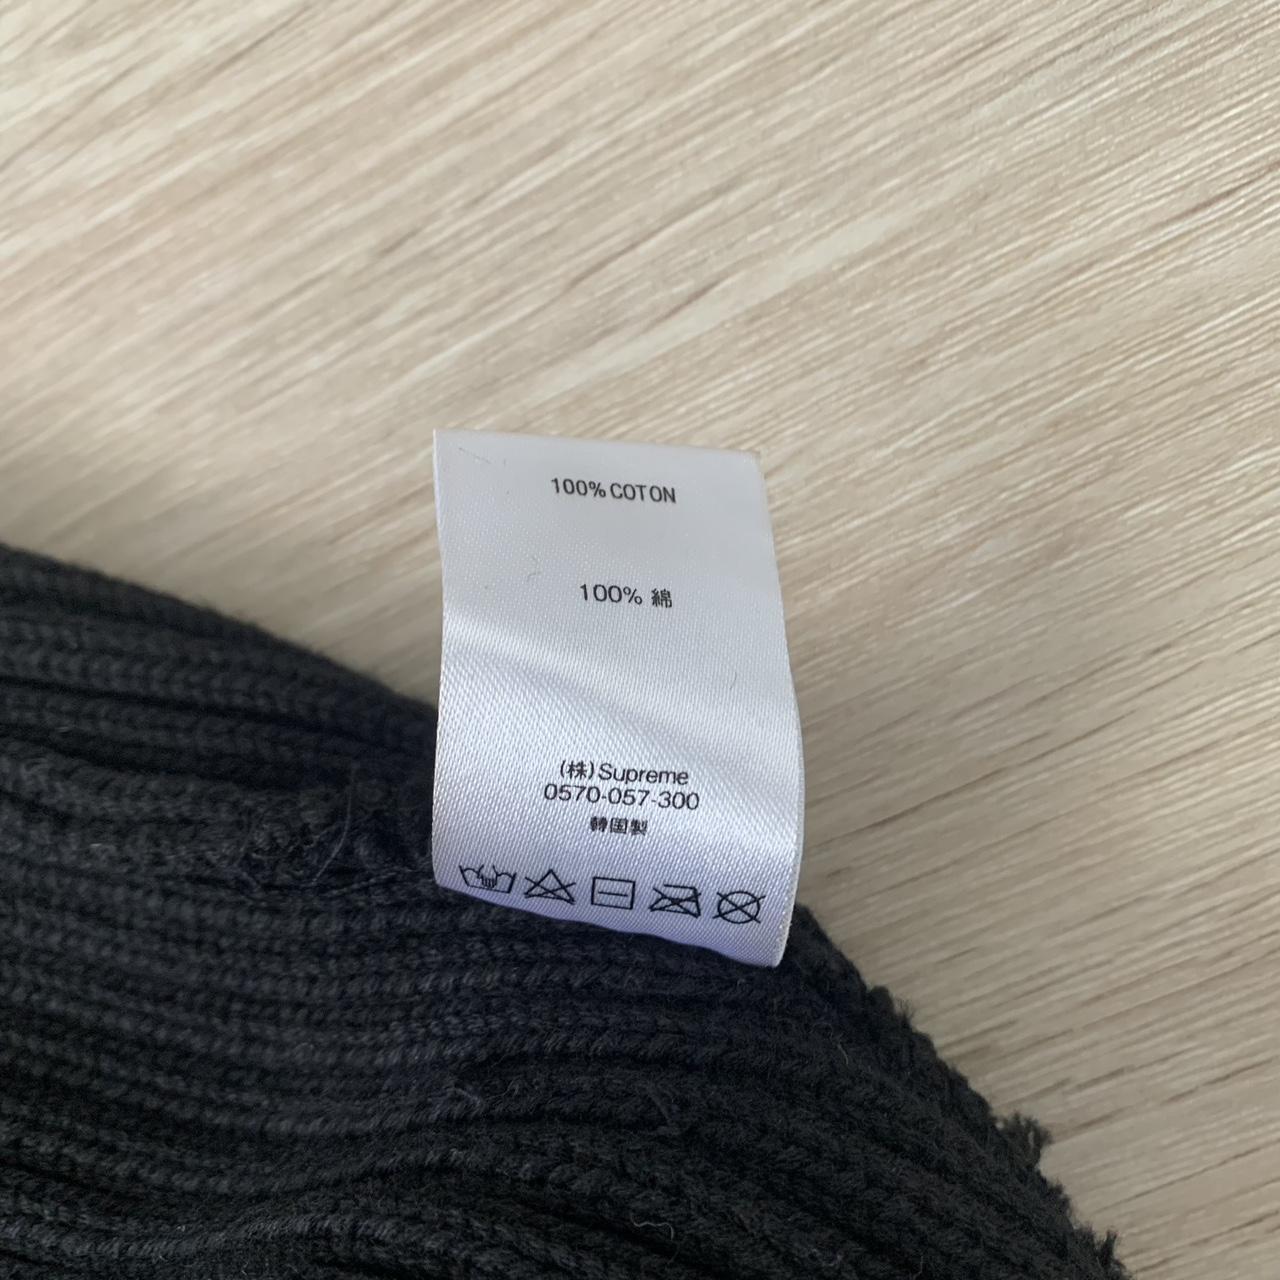 Supreme ribbed logo beanie in Black - Size is one... - Depop